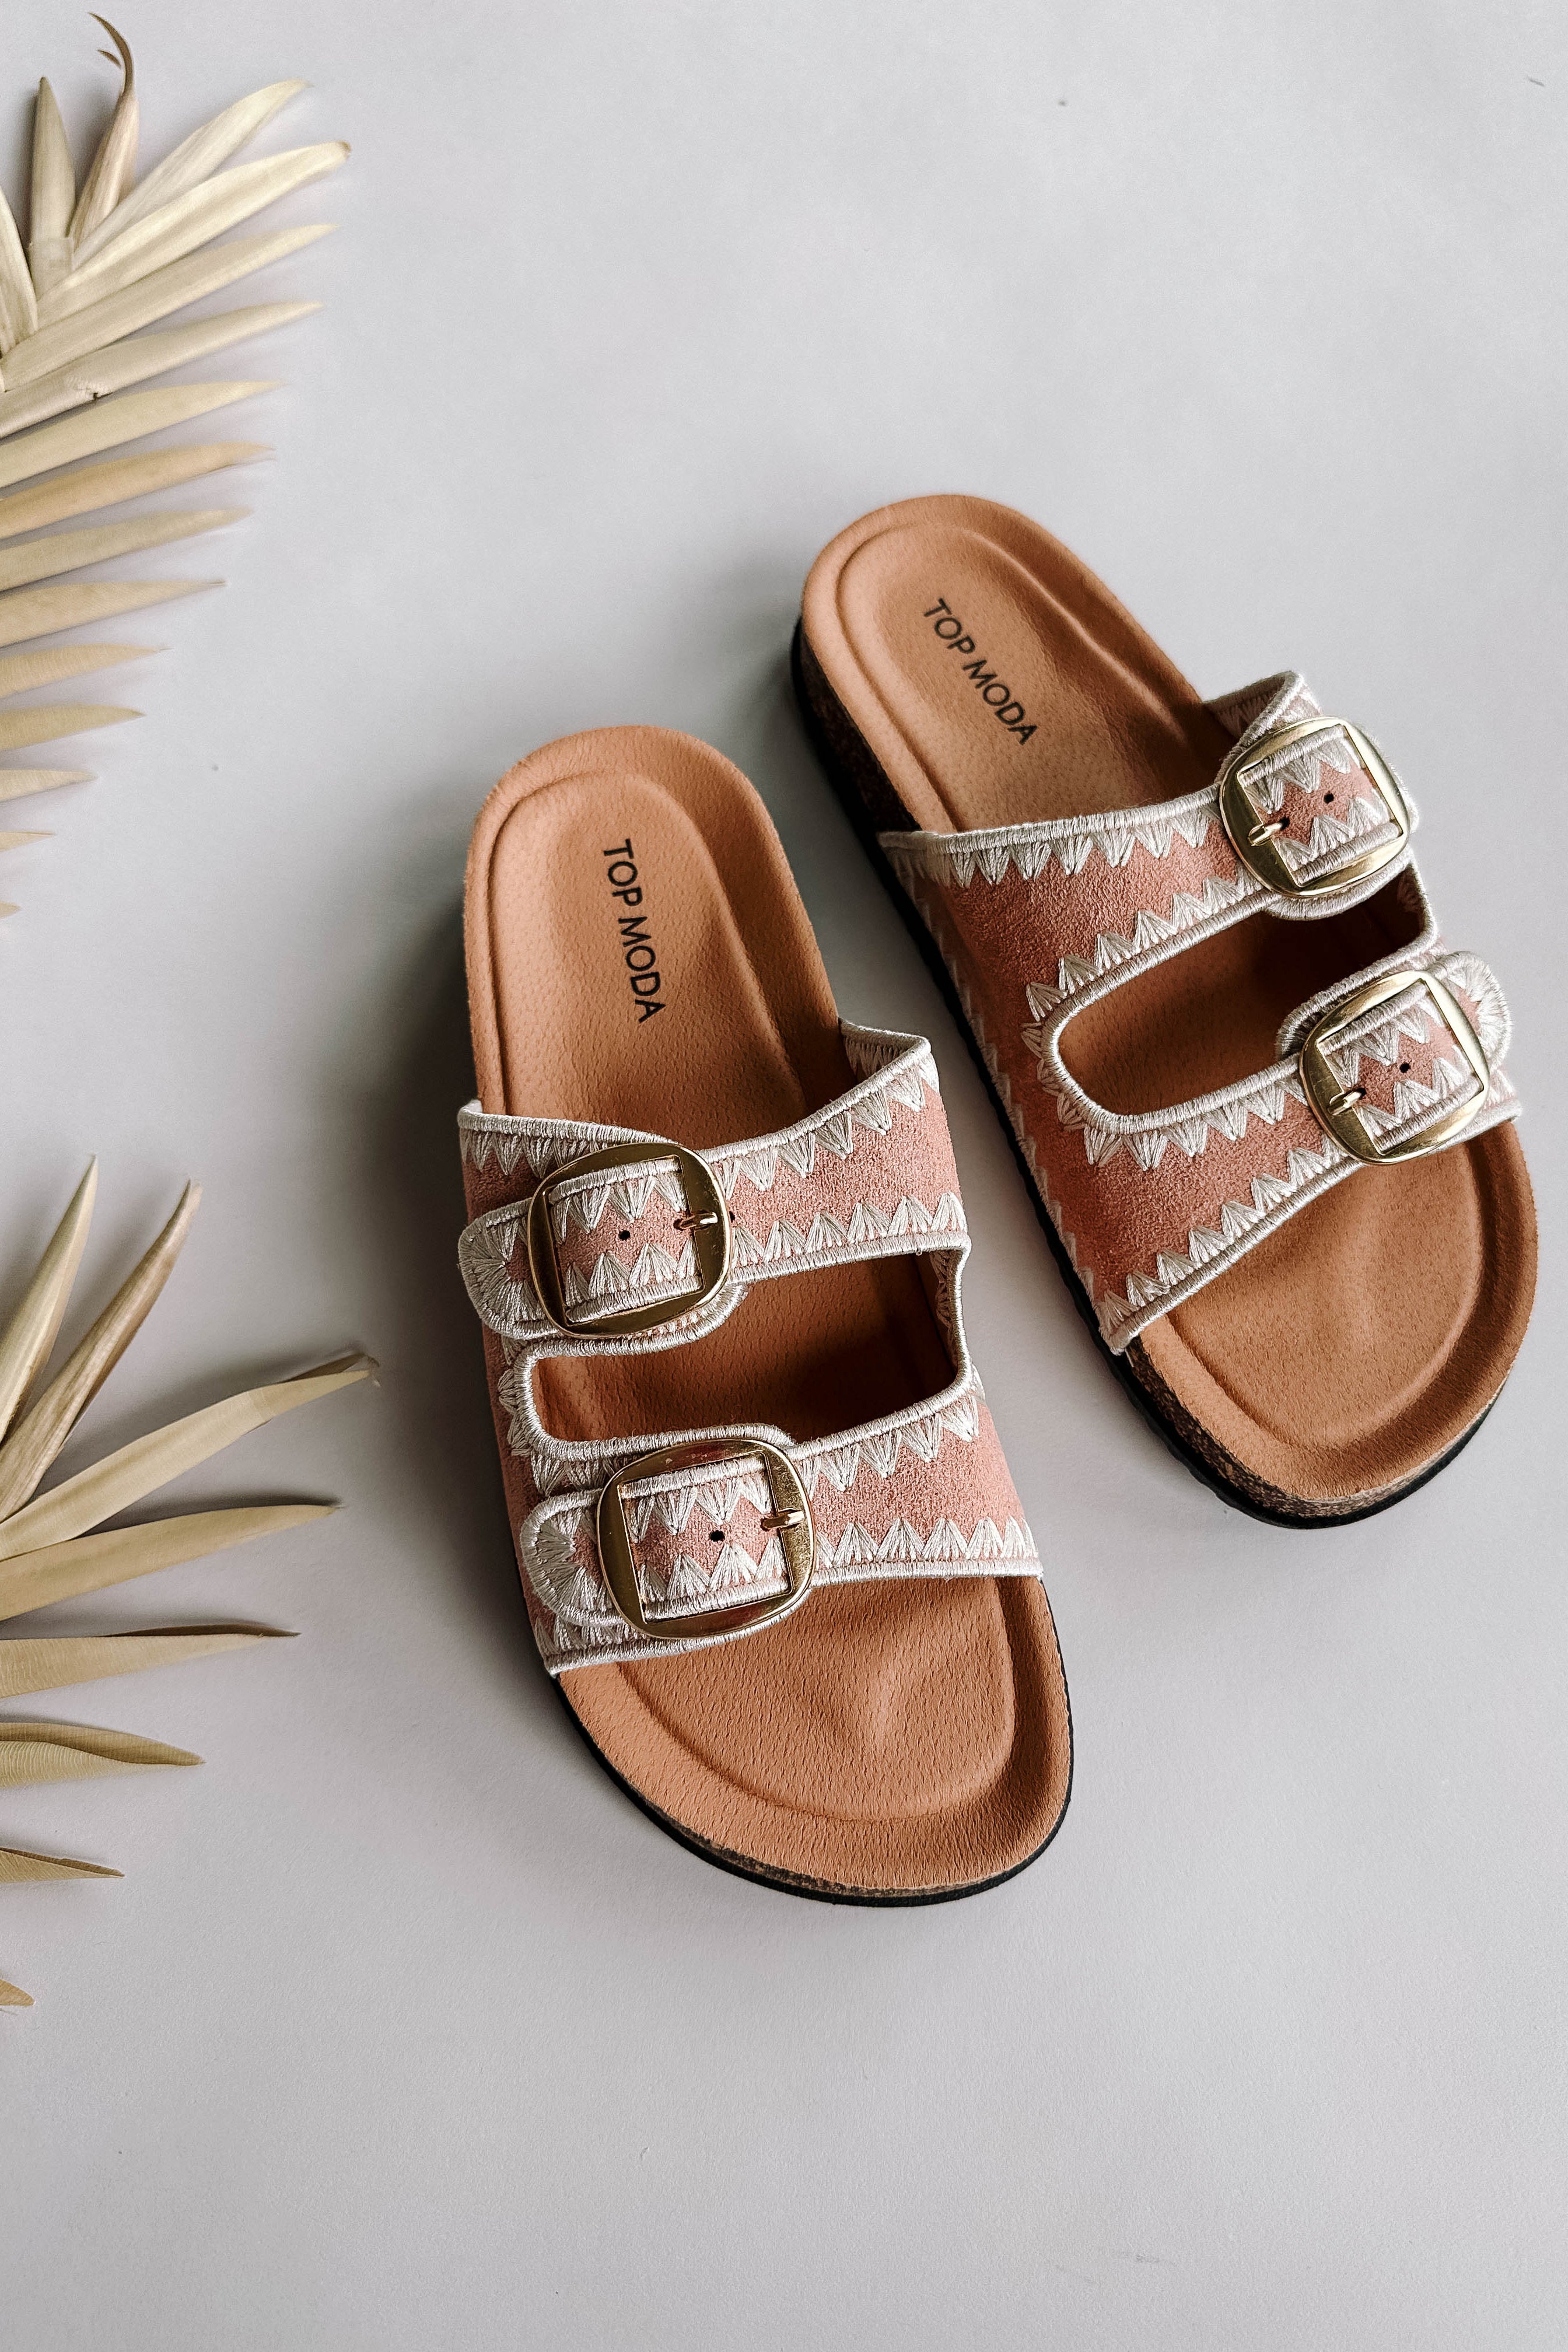 Ariel view of the Luca Sandal in Blush which features blush fabric, cream geometric trim design, two adjustable straps, gold buckles and slide-on style.